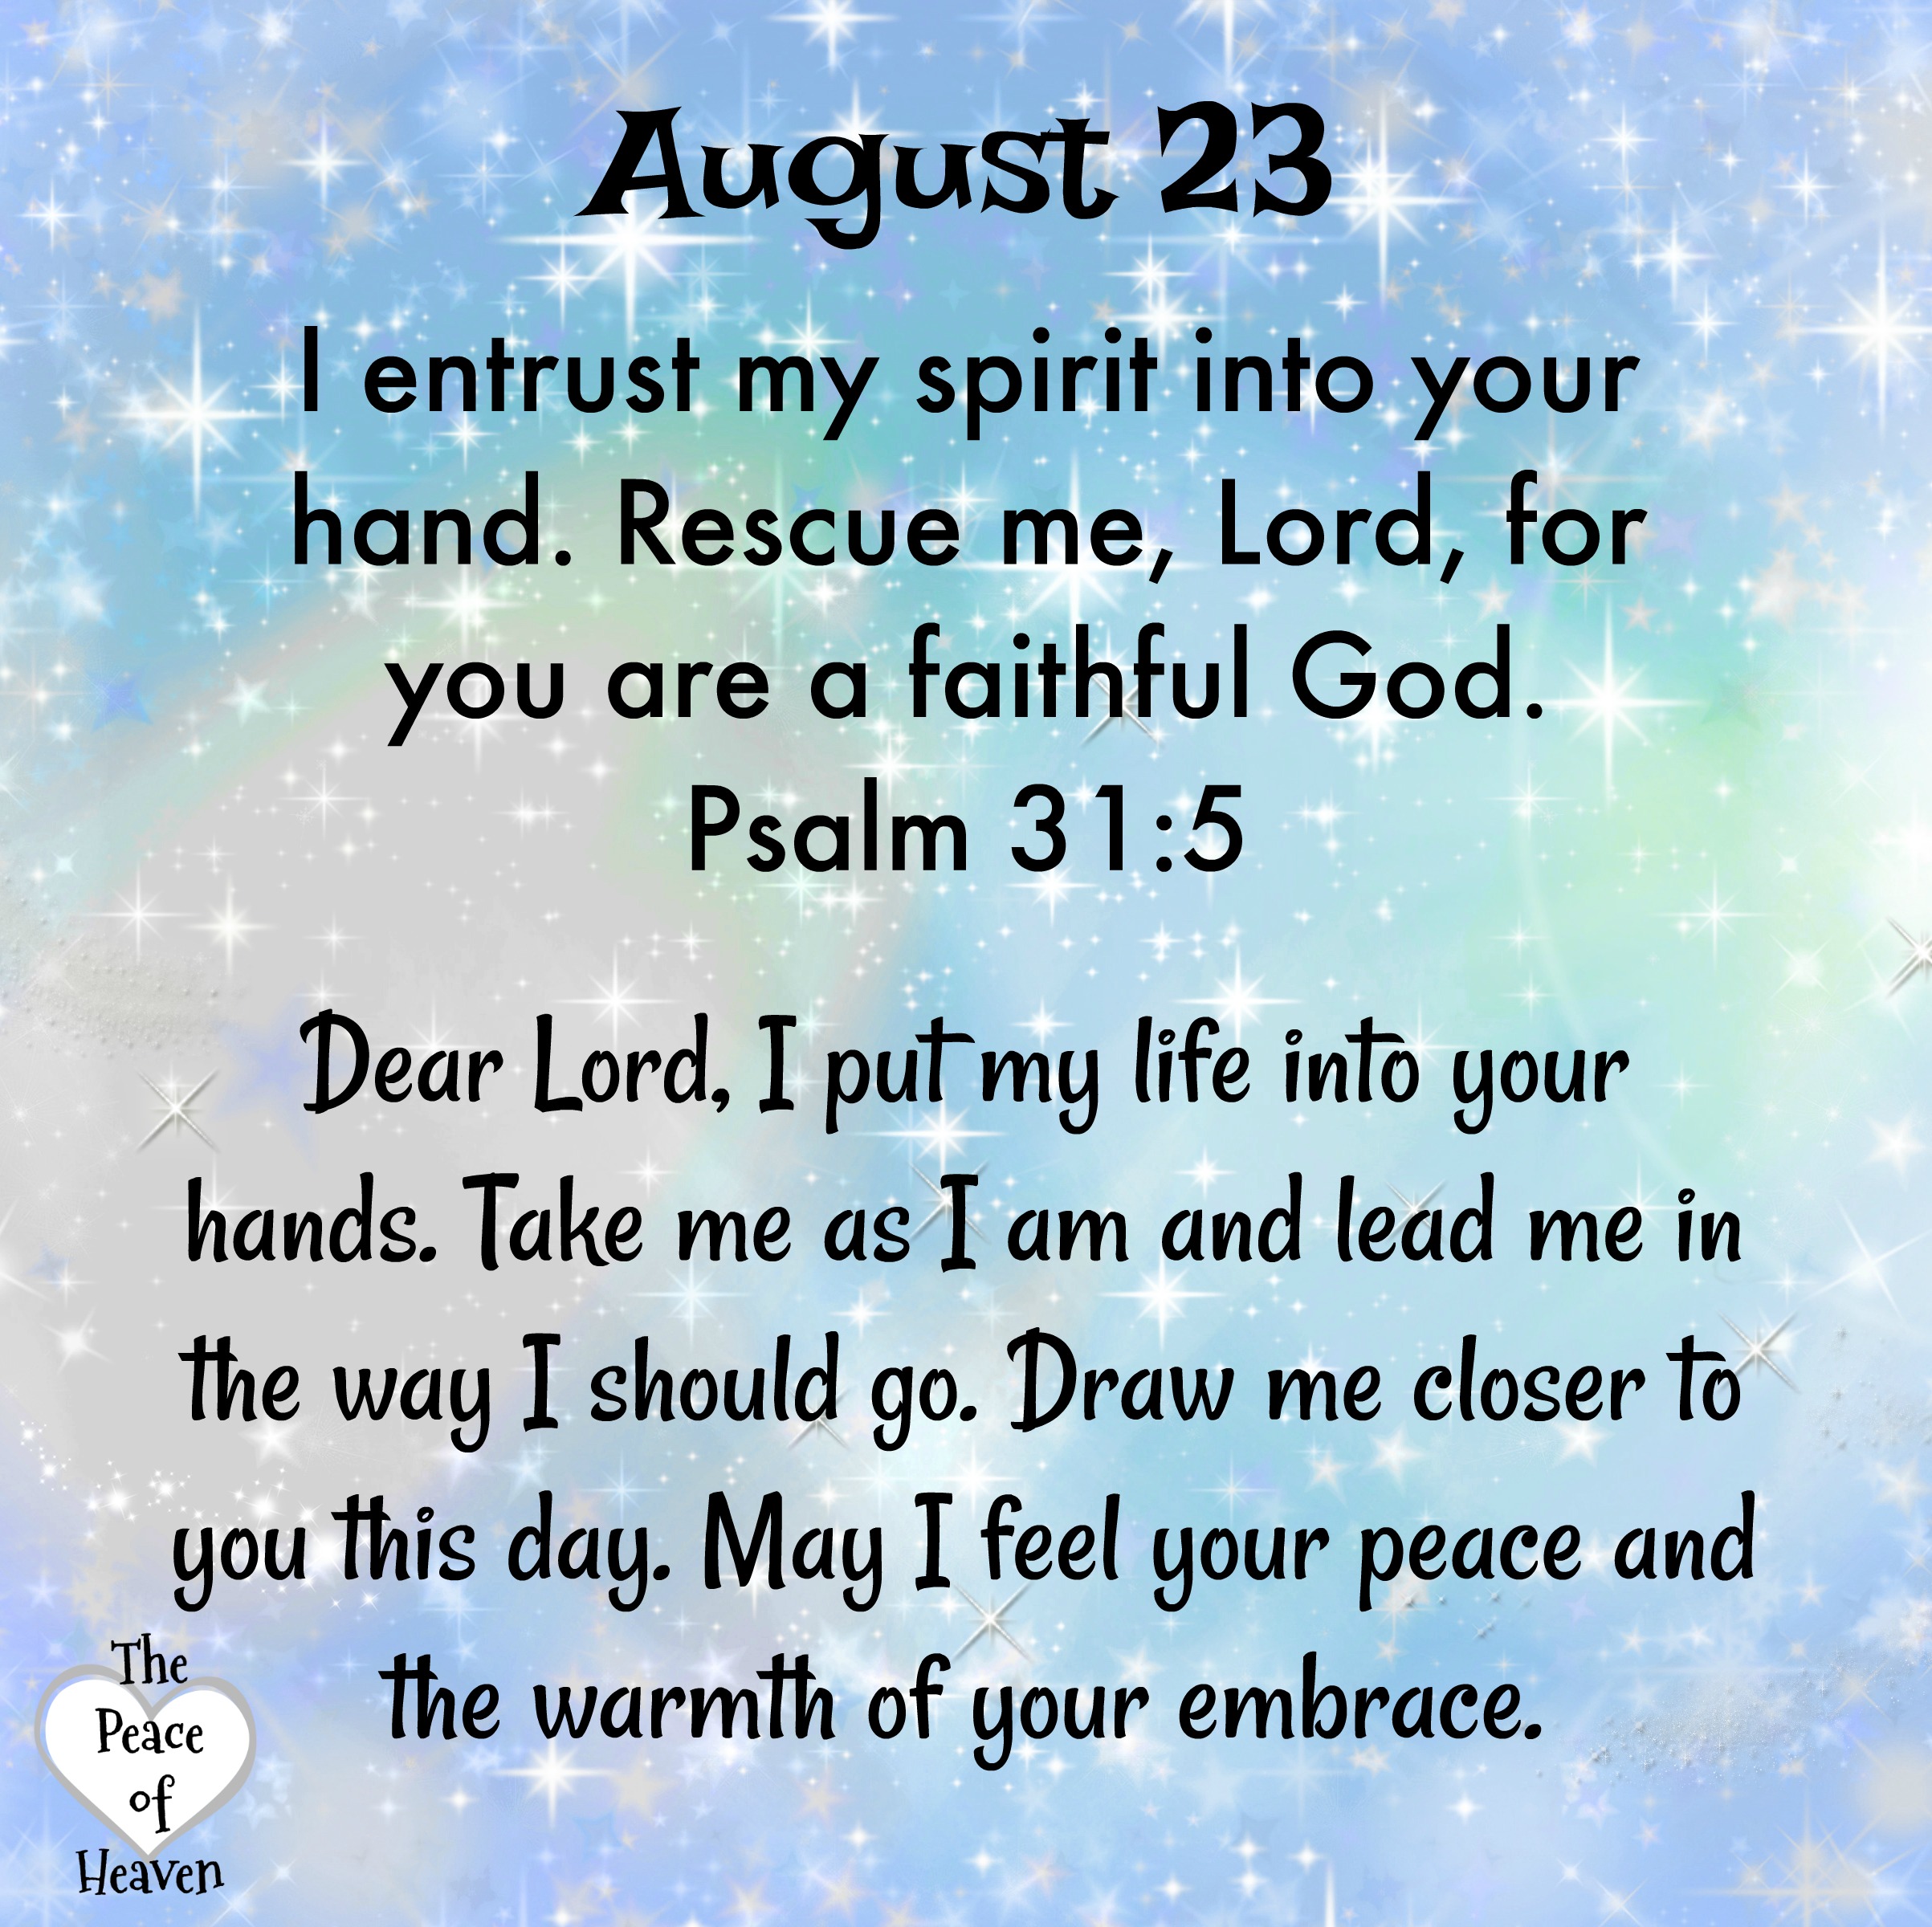 August 23 – The Peace of Heaven